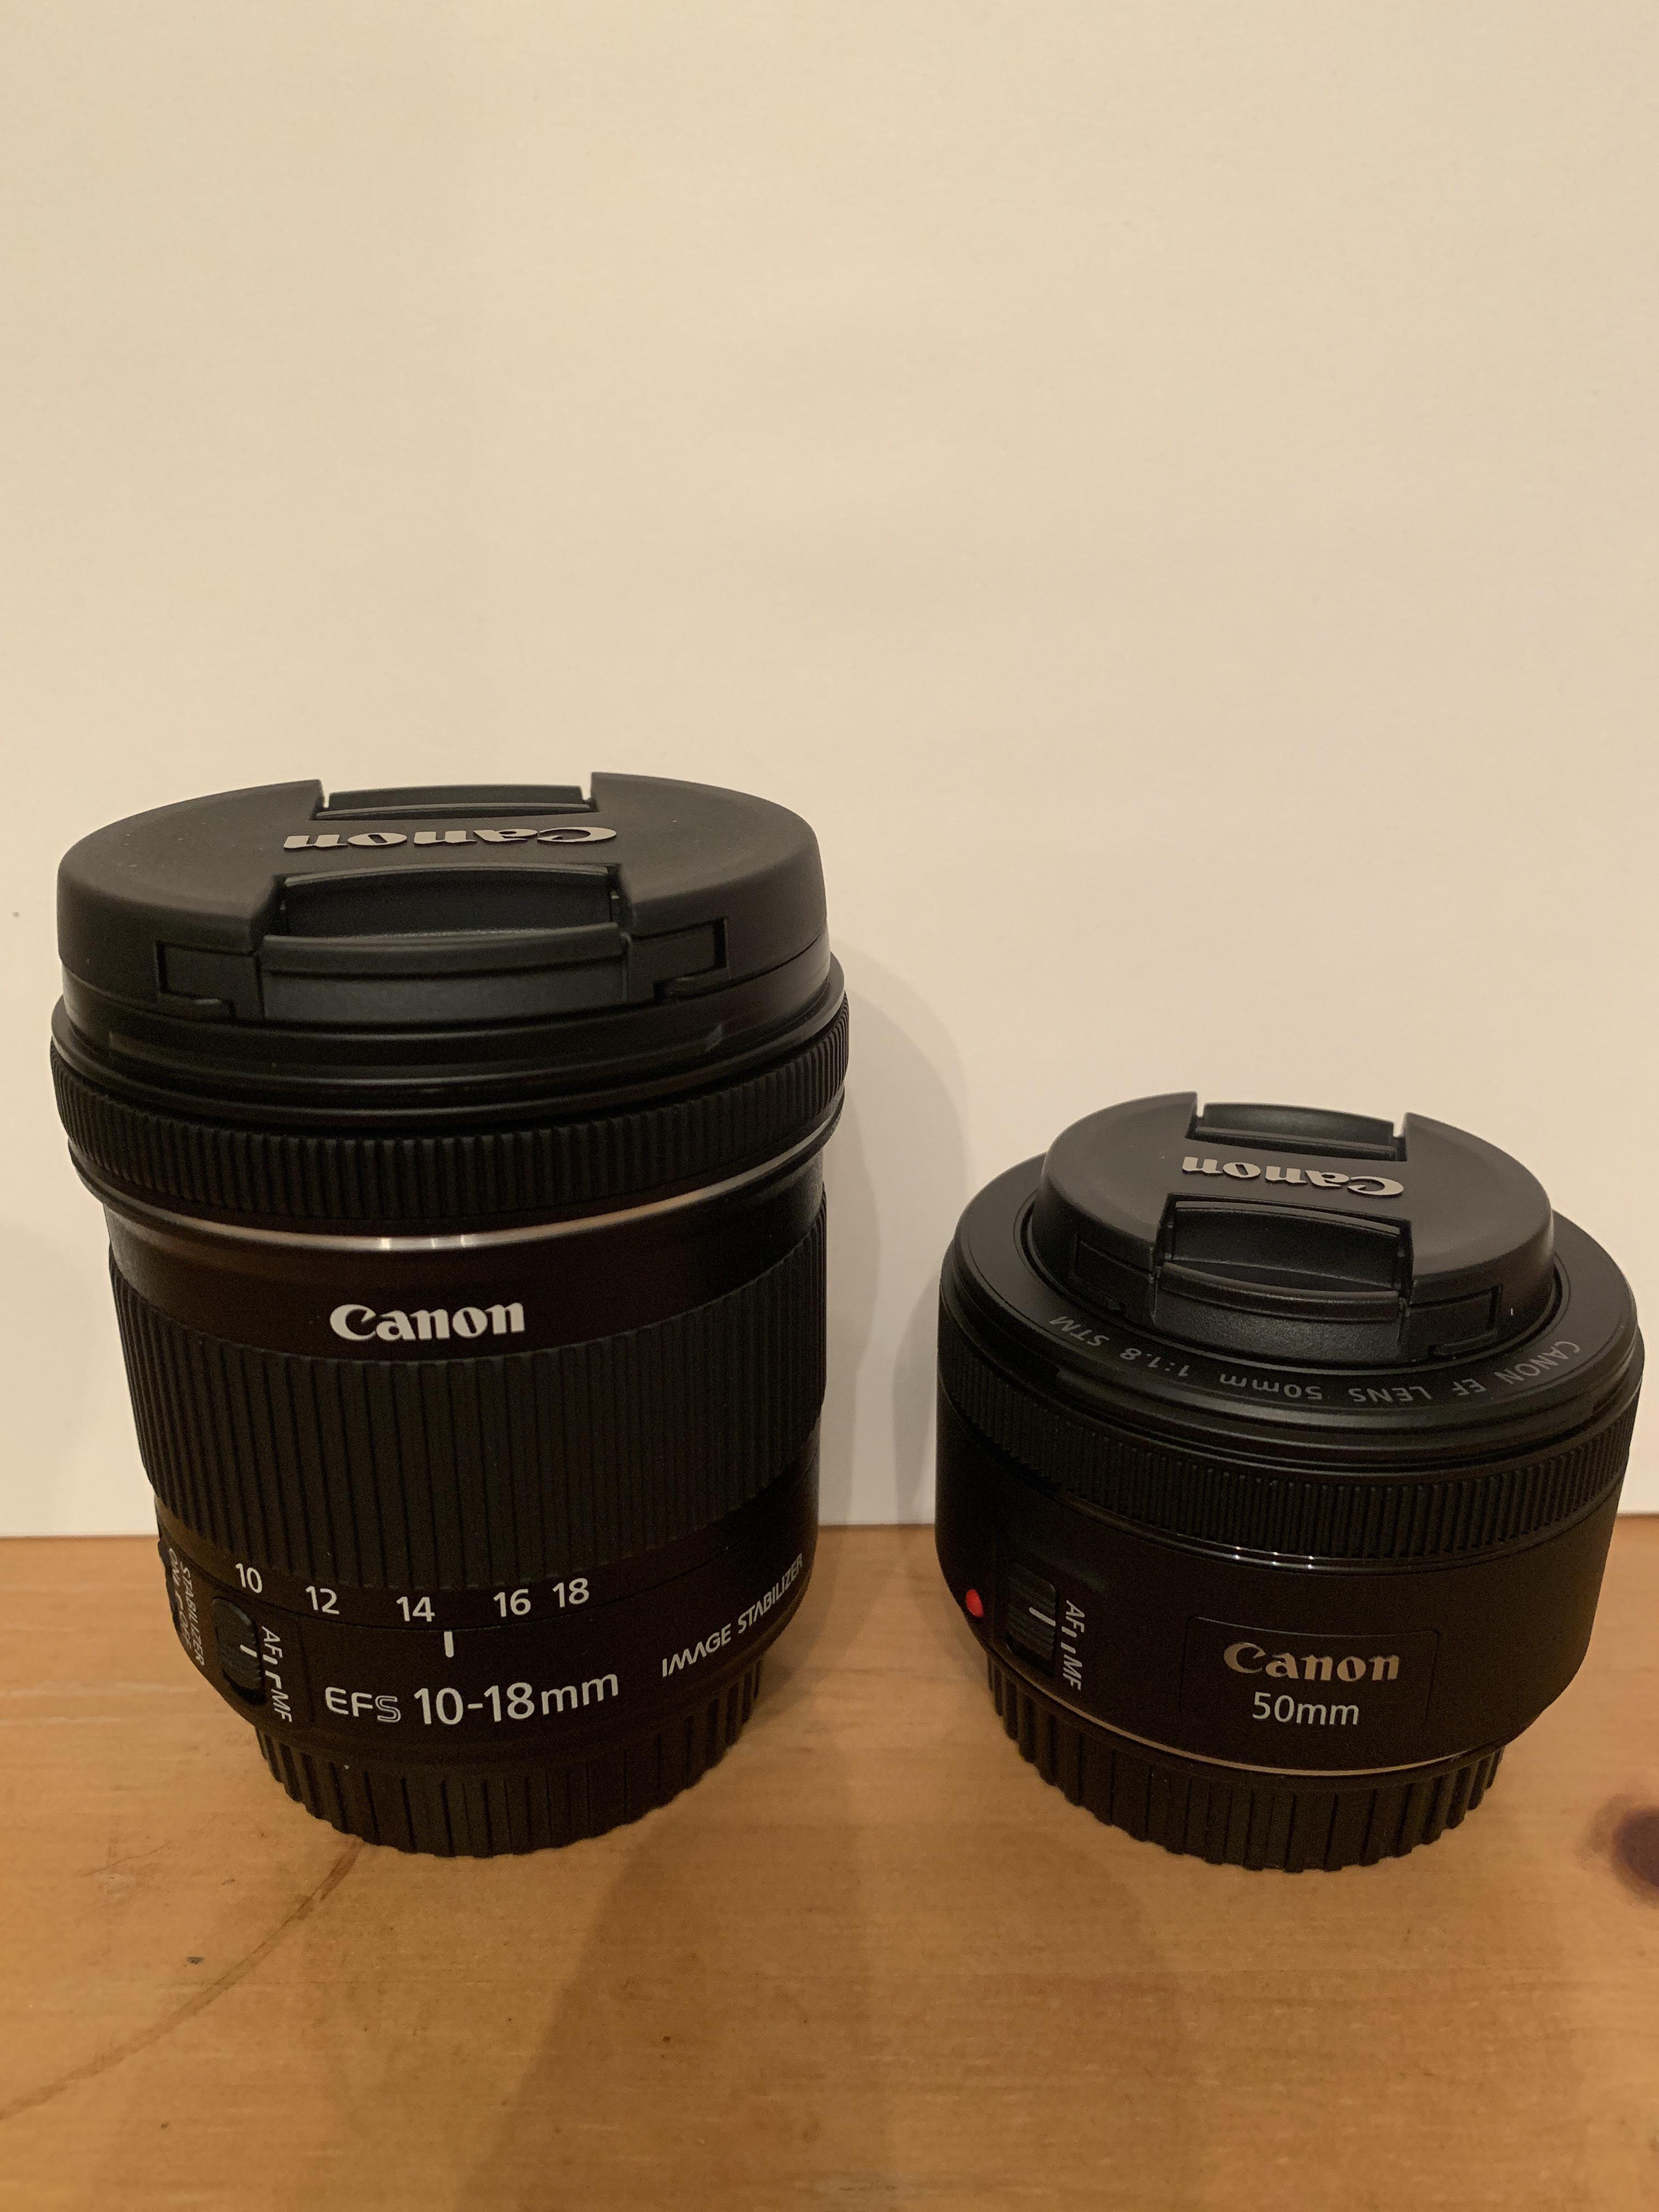 Travel lens kit arrived today! canon